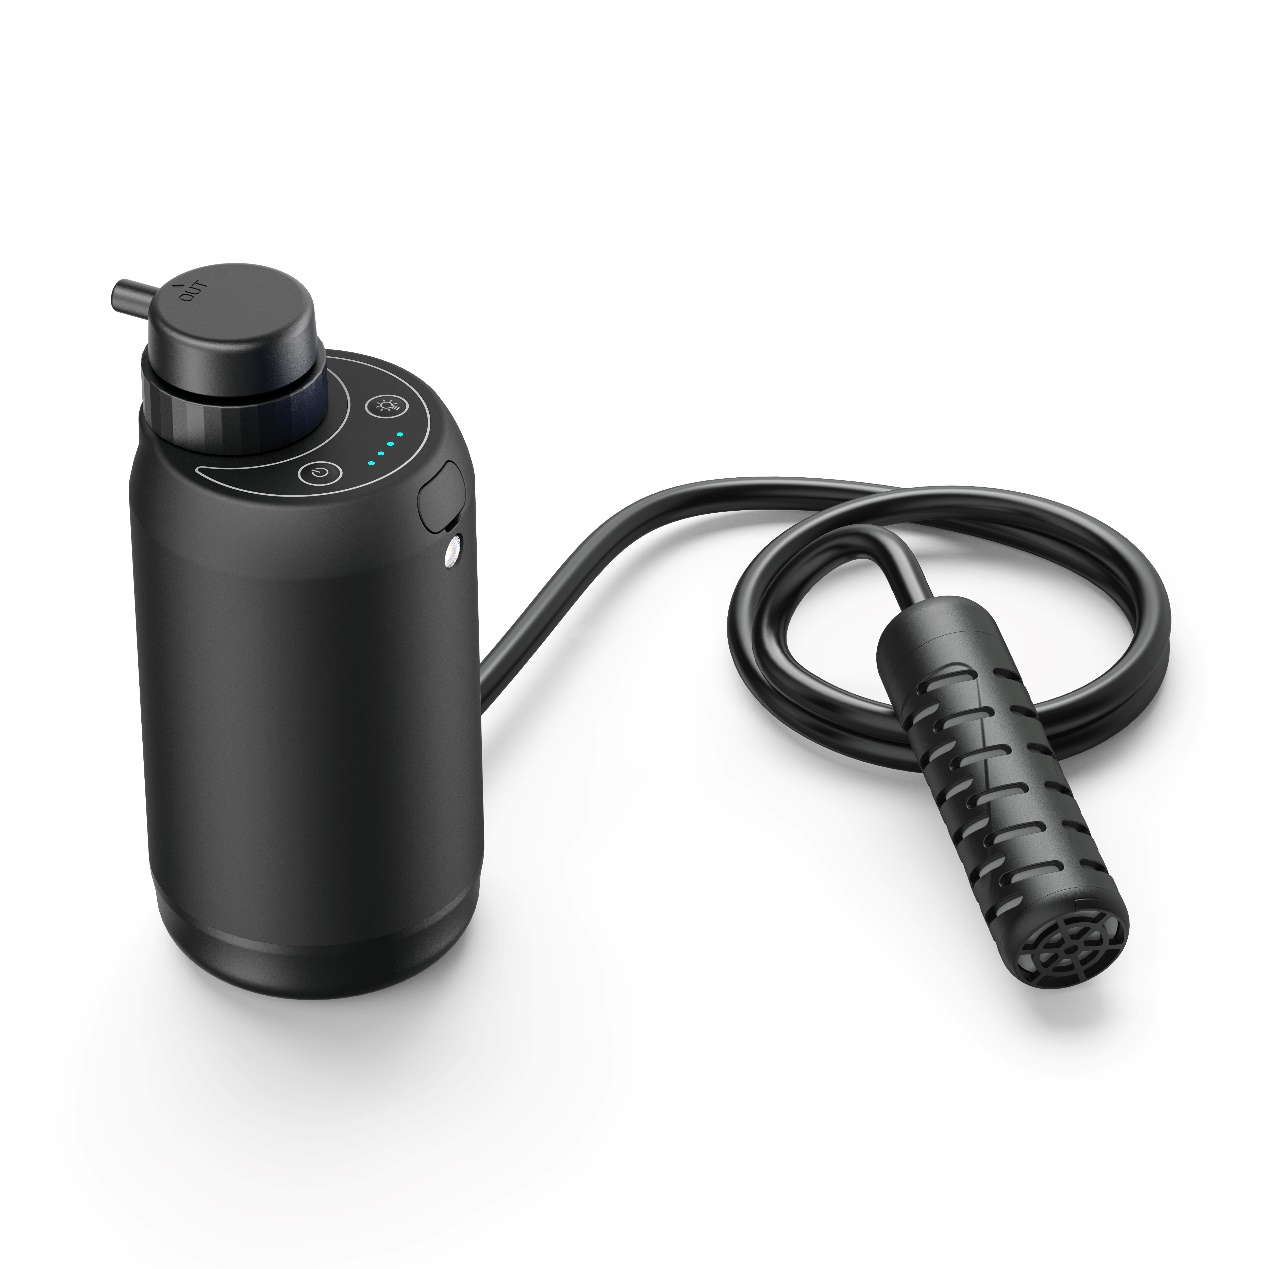 The Advantages of a Portable Water Filter for Adventure